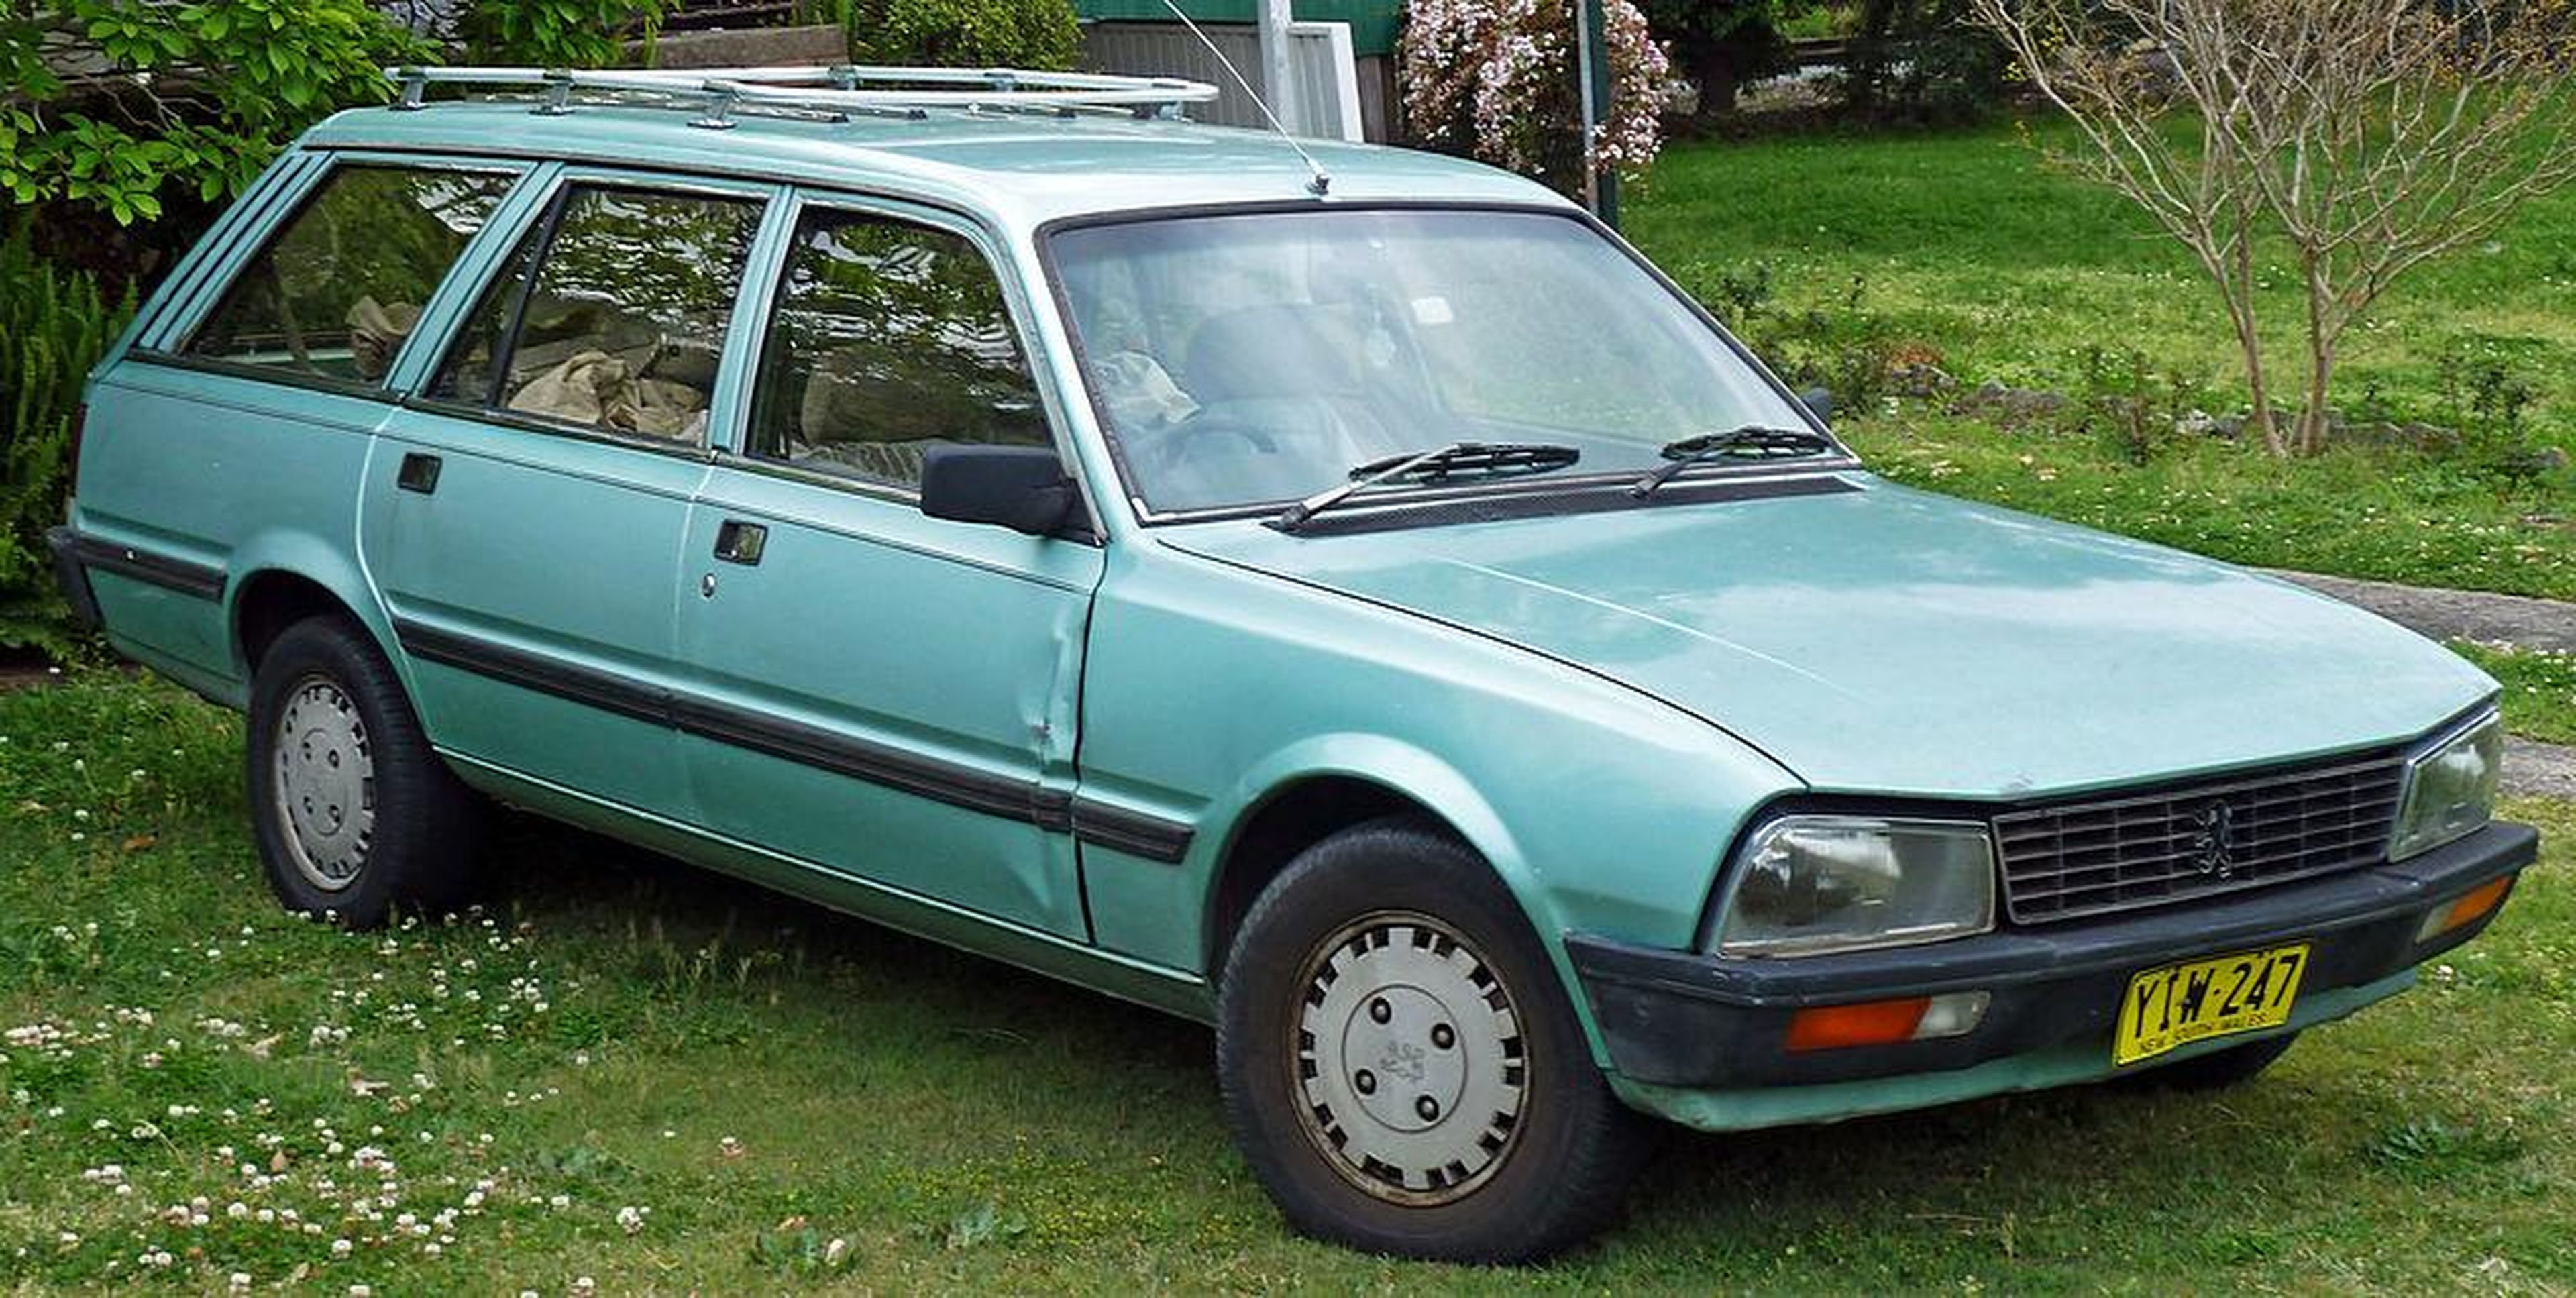 An early employee owned a blue Peugeot station wagon like this one.